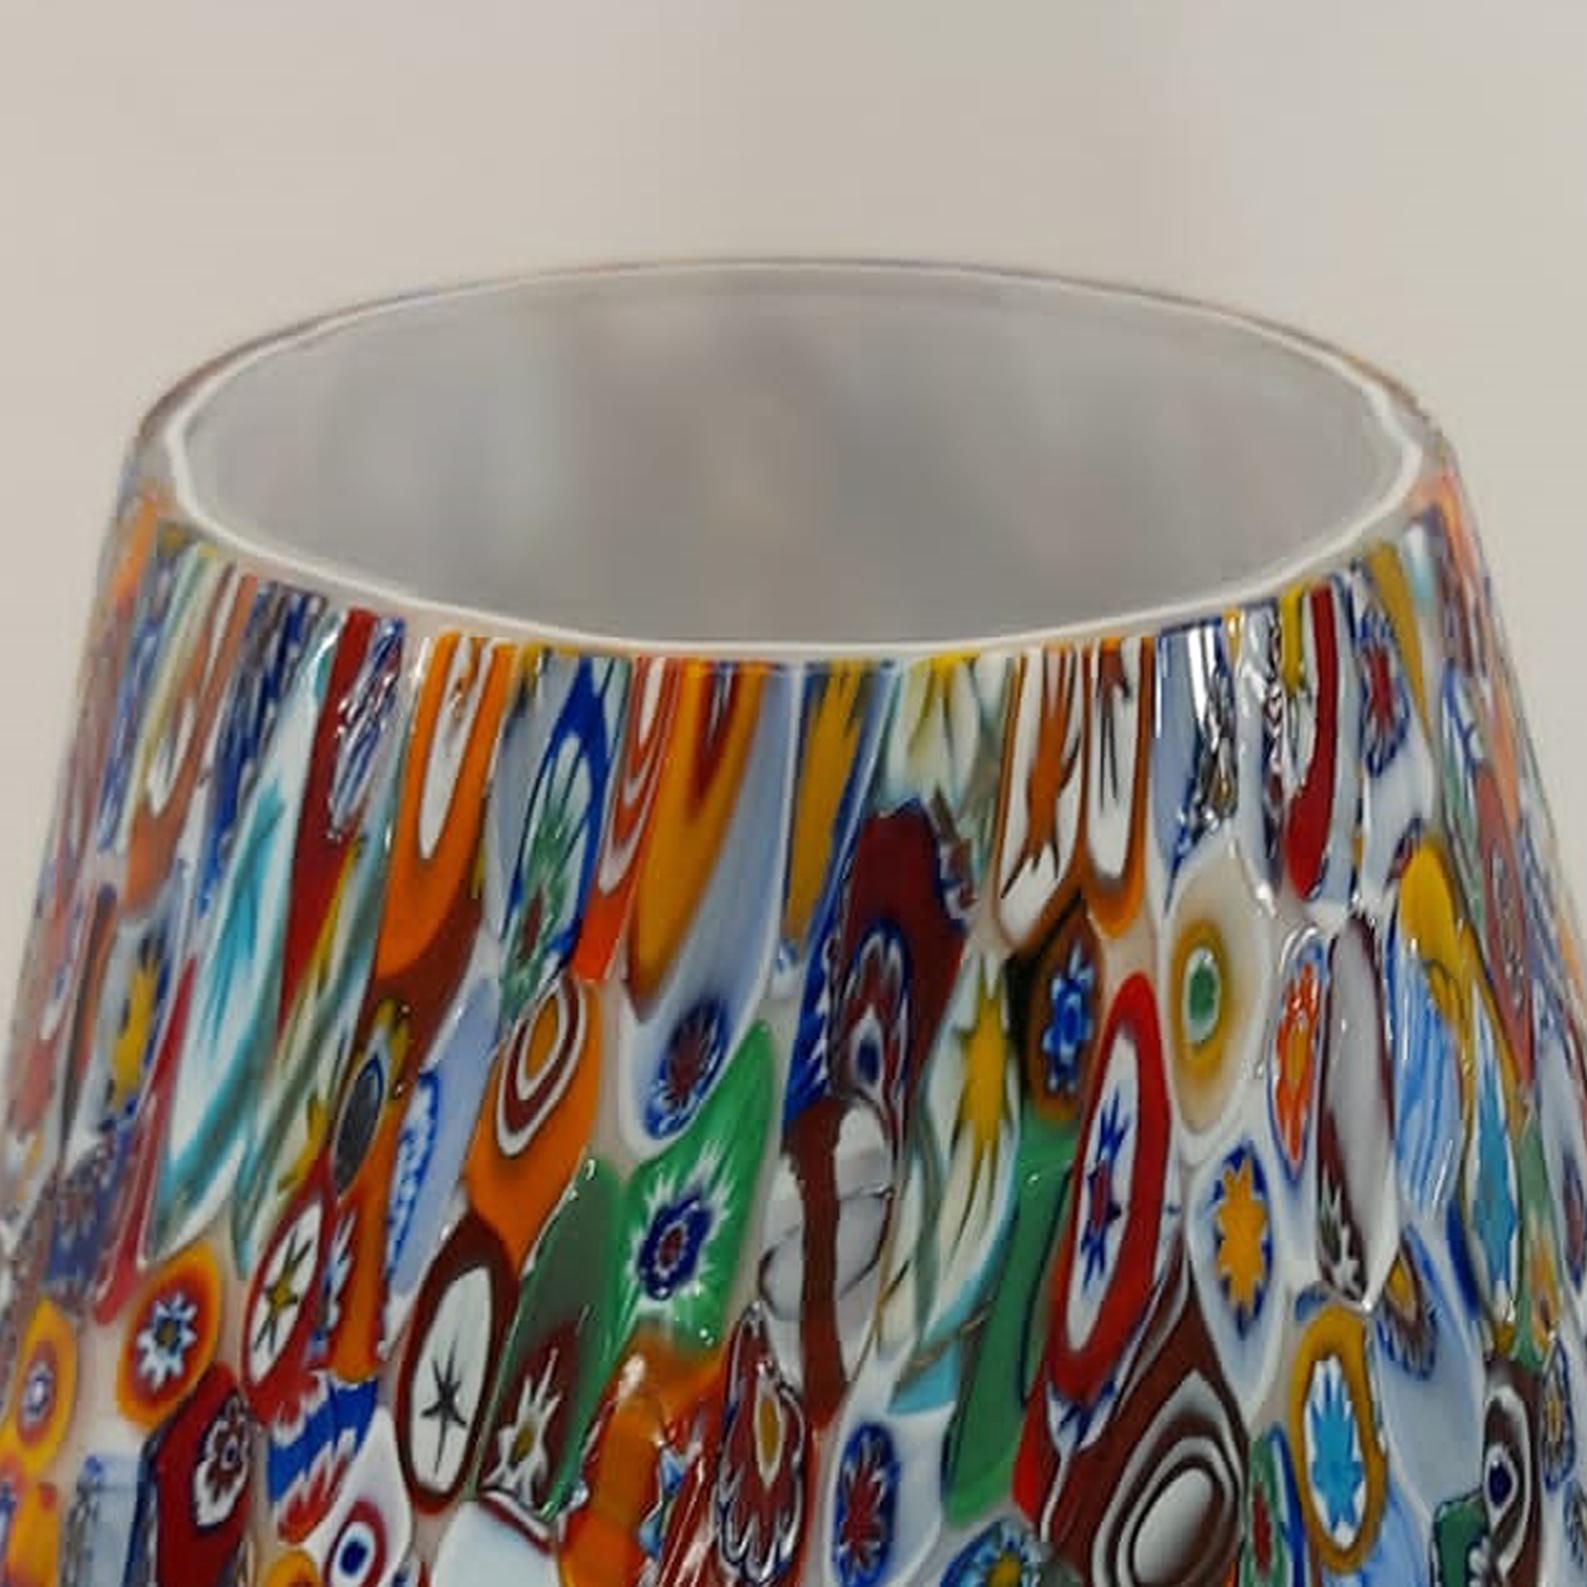 Pair of Big Hancrafted Murano Table Lamps Murrine Millefiori Decor, Italy 2000's For Sale 7